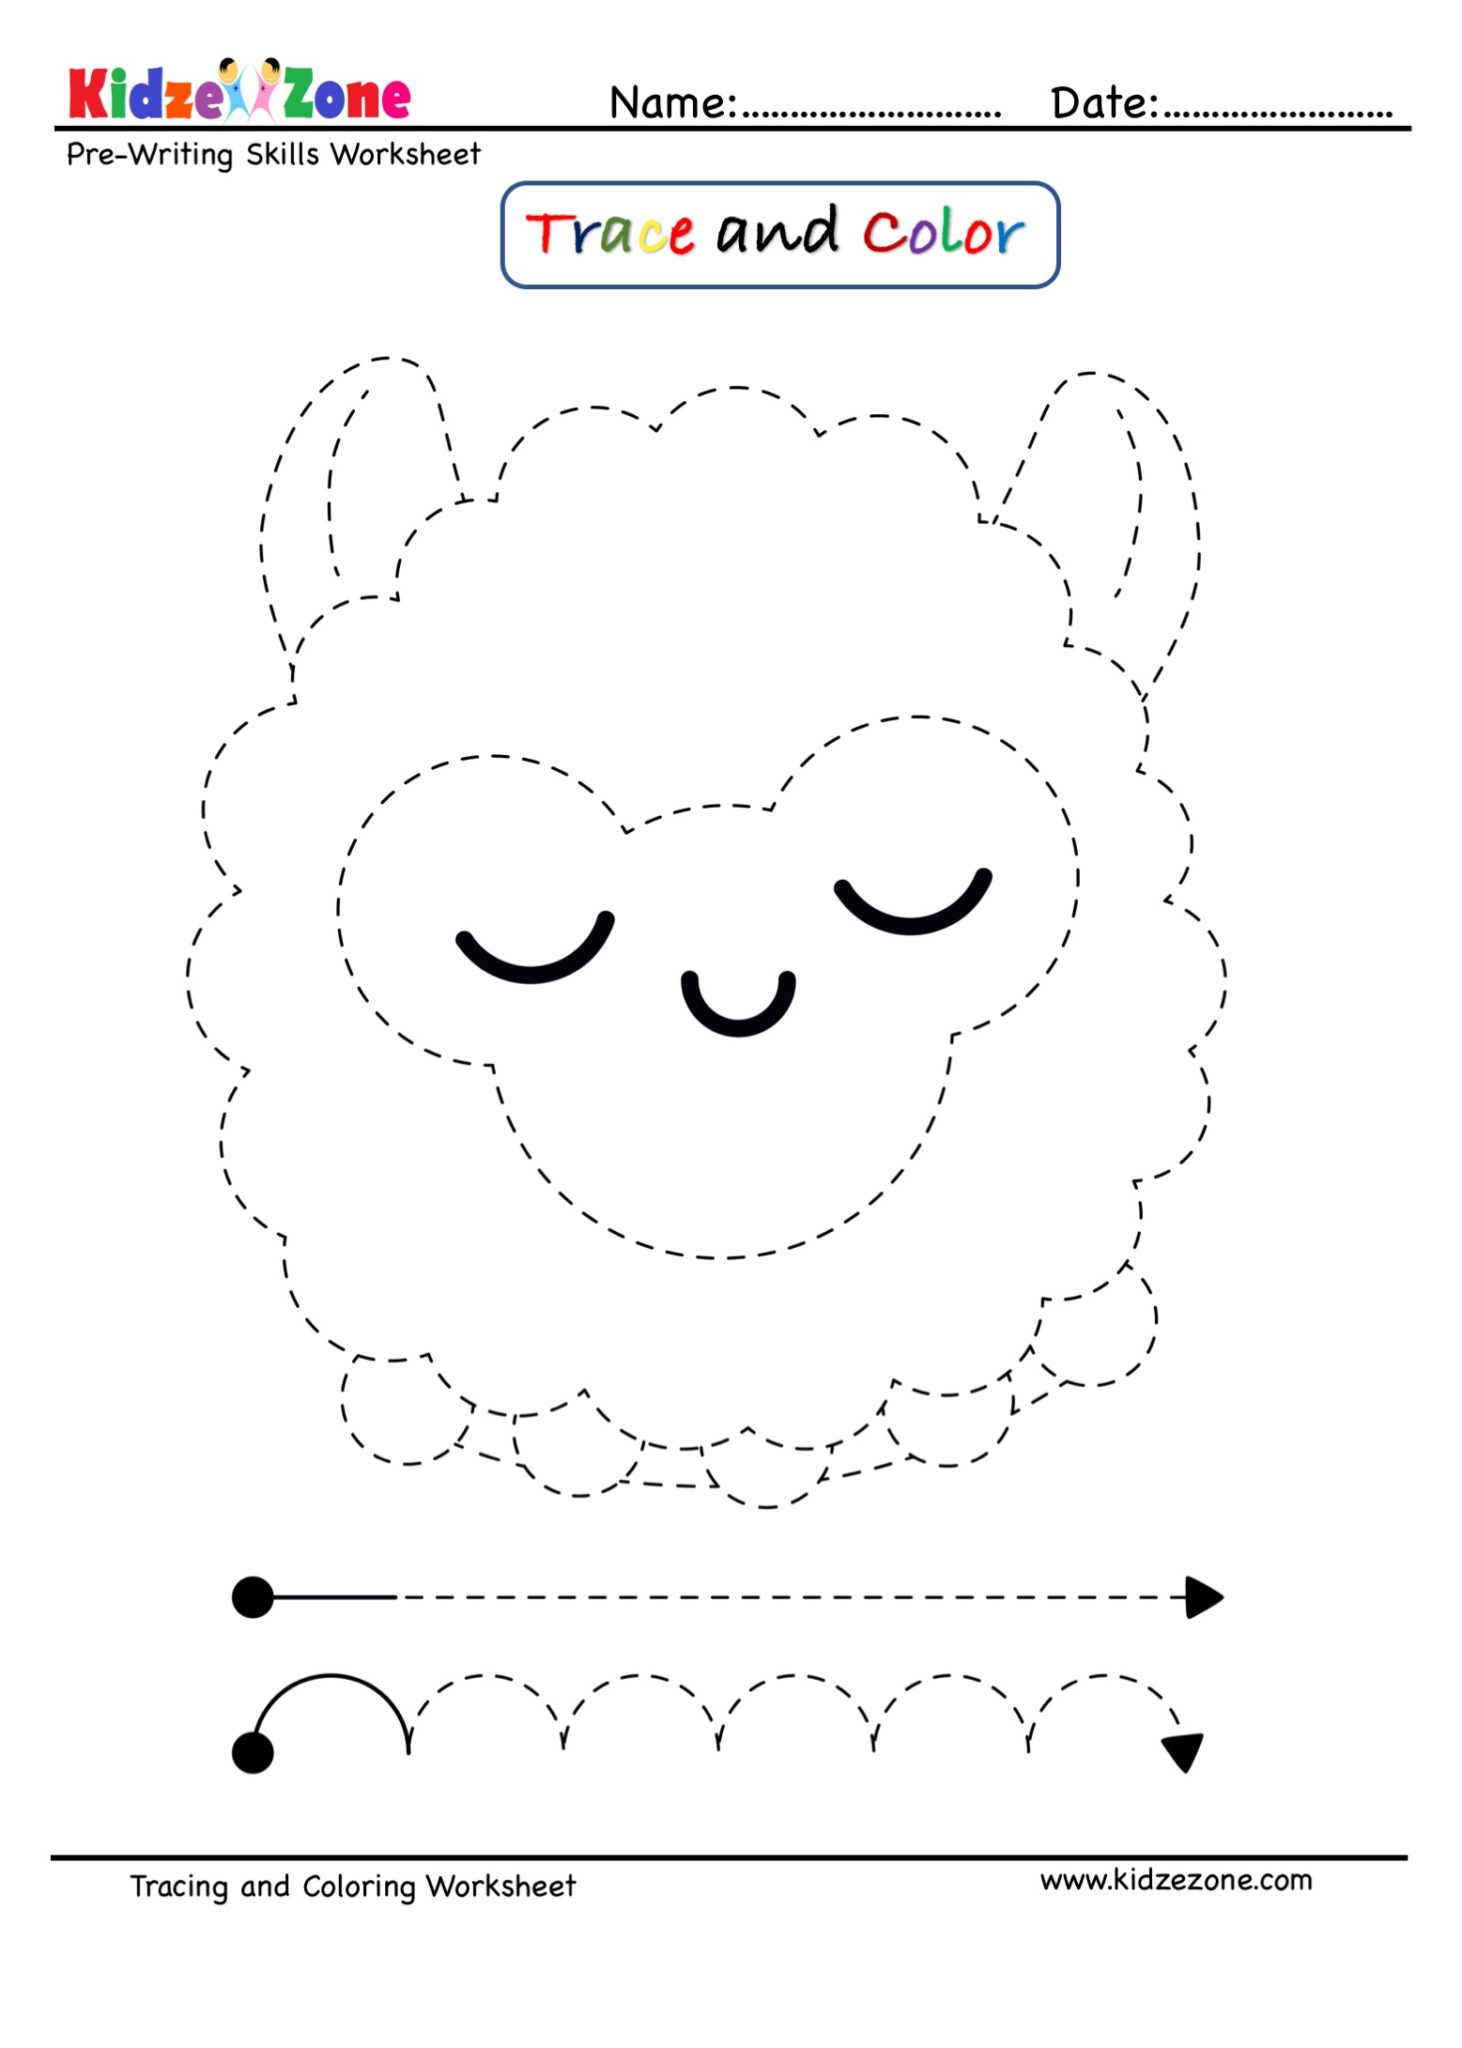 pre-writing-trace-and-color-worksheet-sheep-cartoon-face-kidzezone